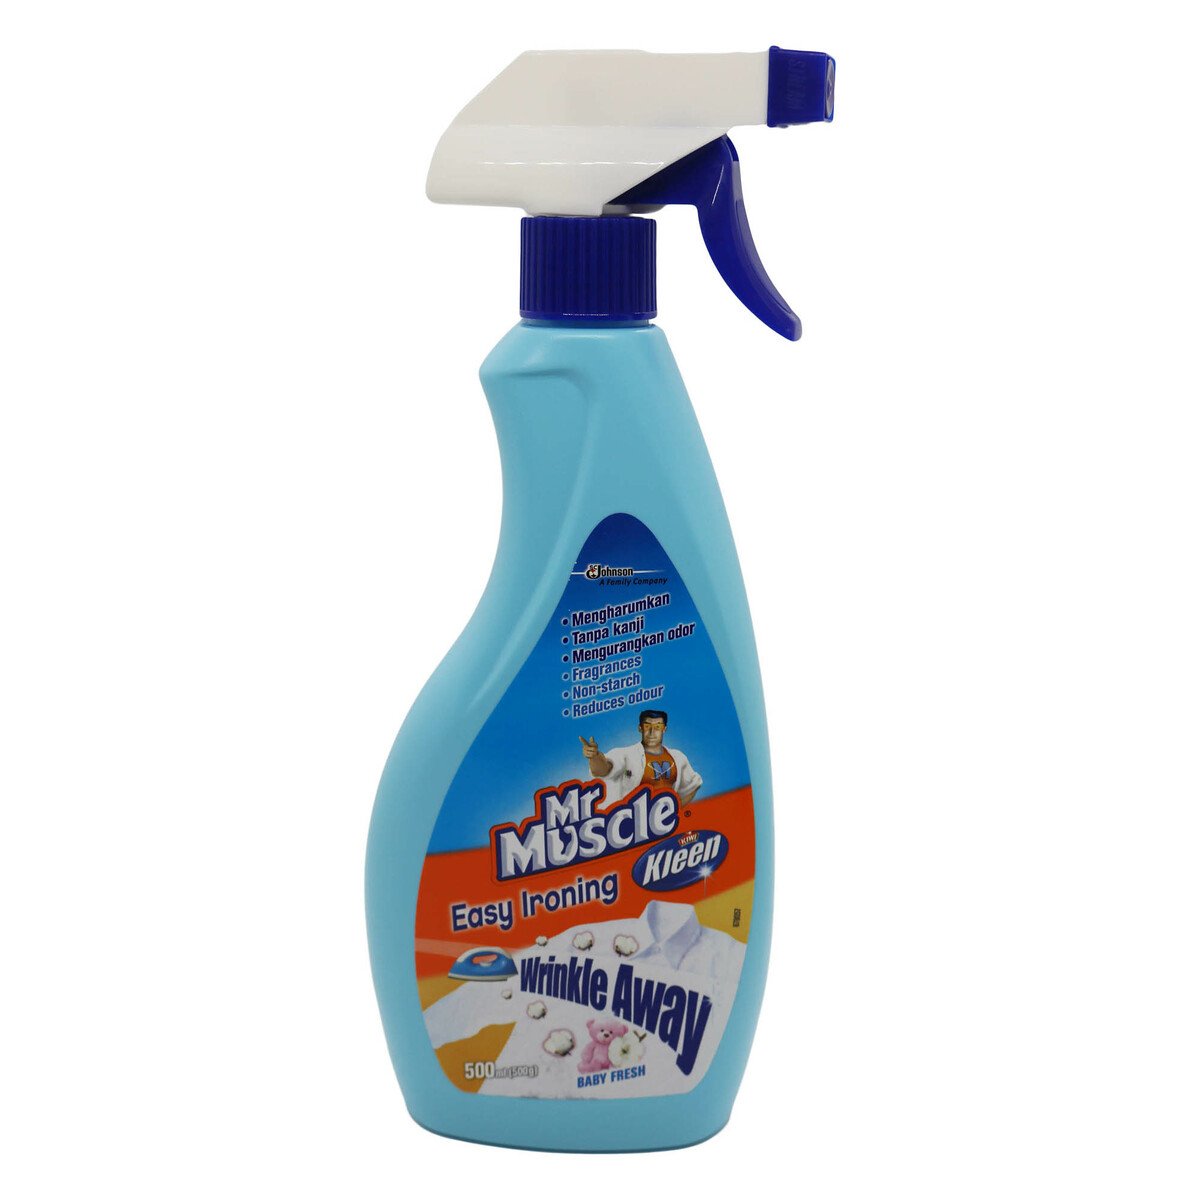 Mr Muscle Easy Ironing Baby Fresh 500ml